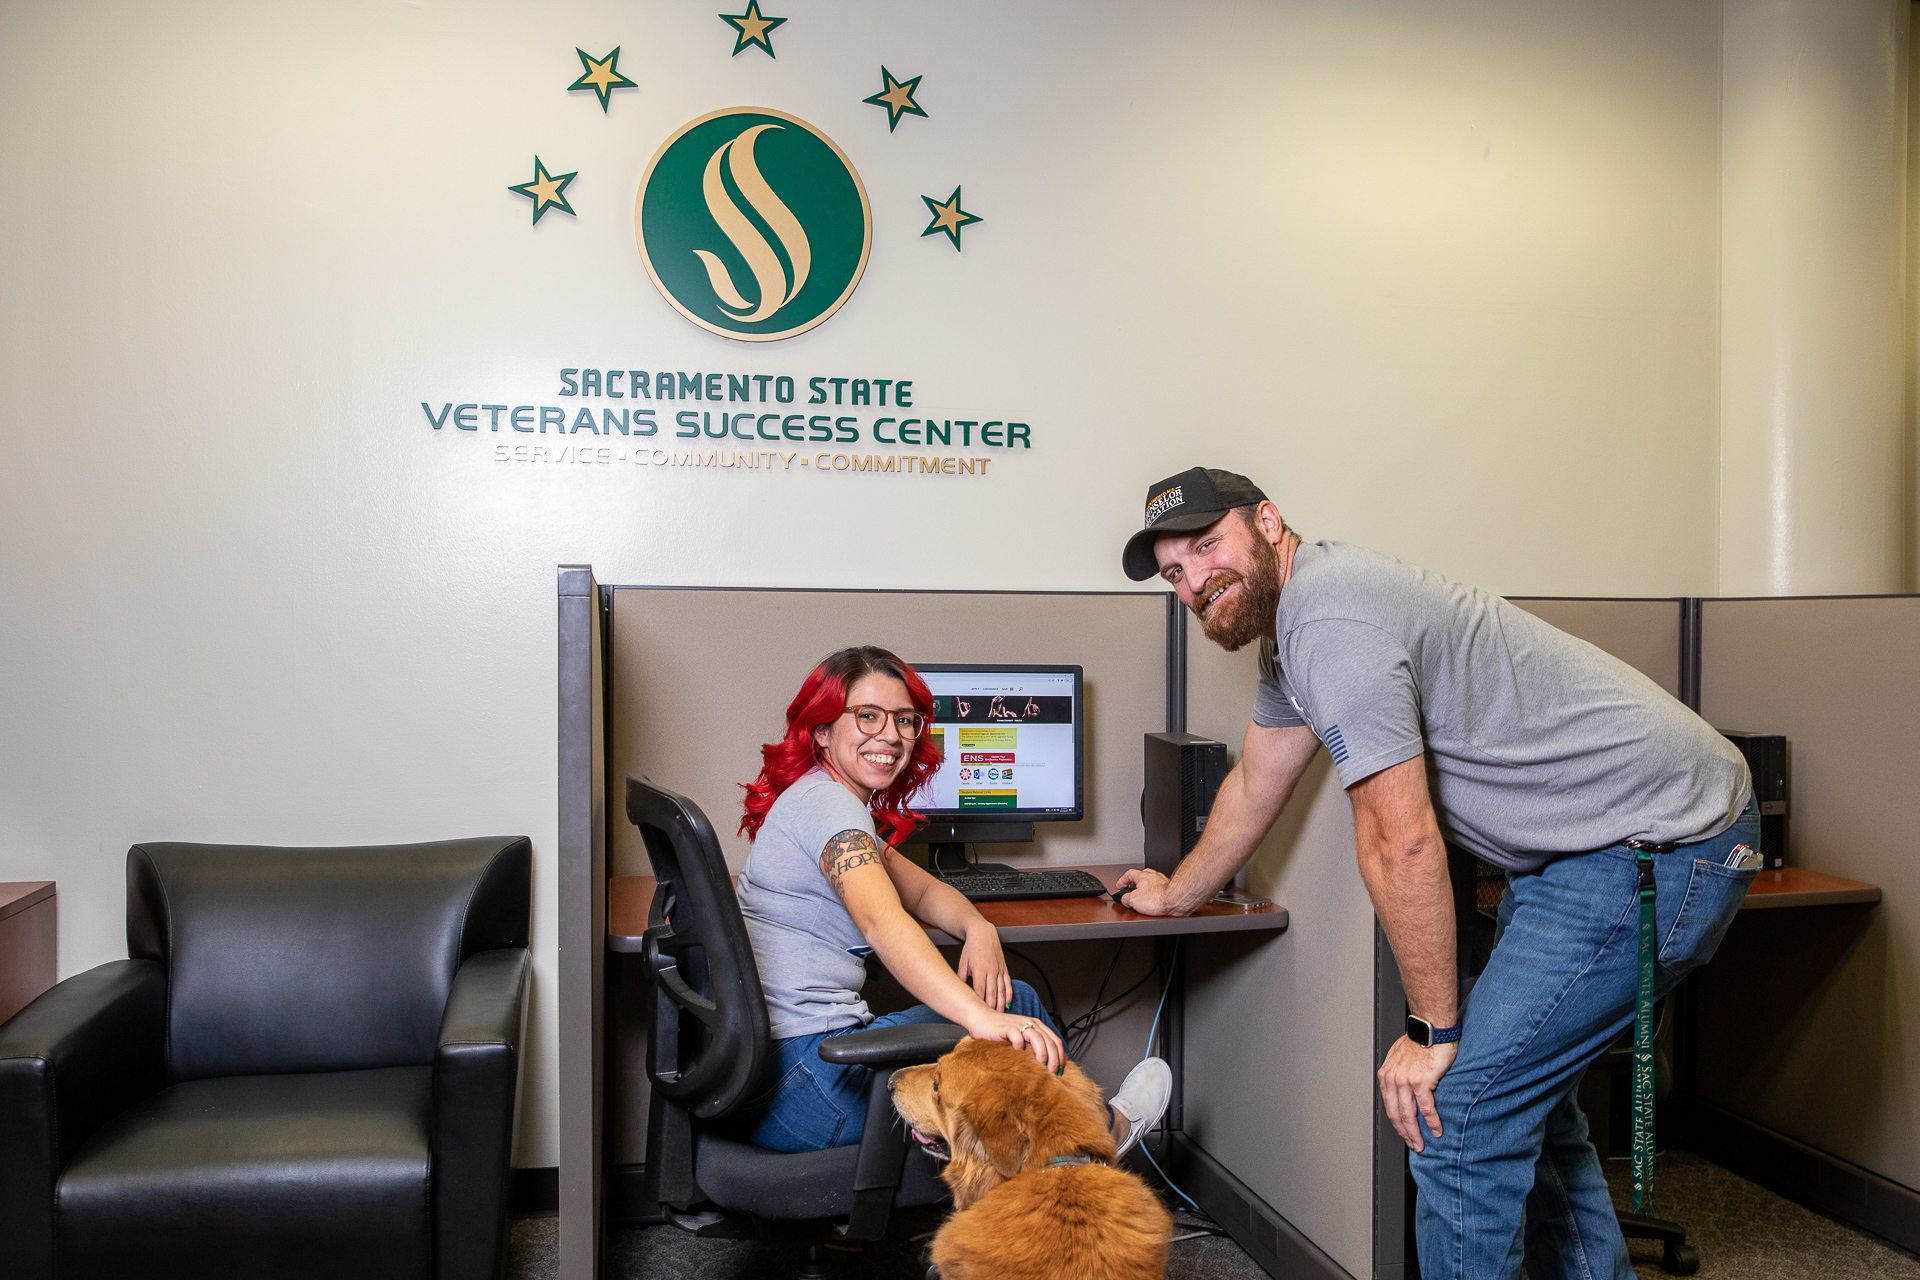 Jennifer Gomez and Elias Kruse, in the Veterans Success Center, posing for a photo near a computer